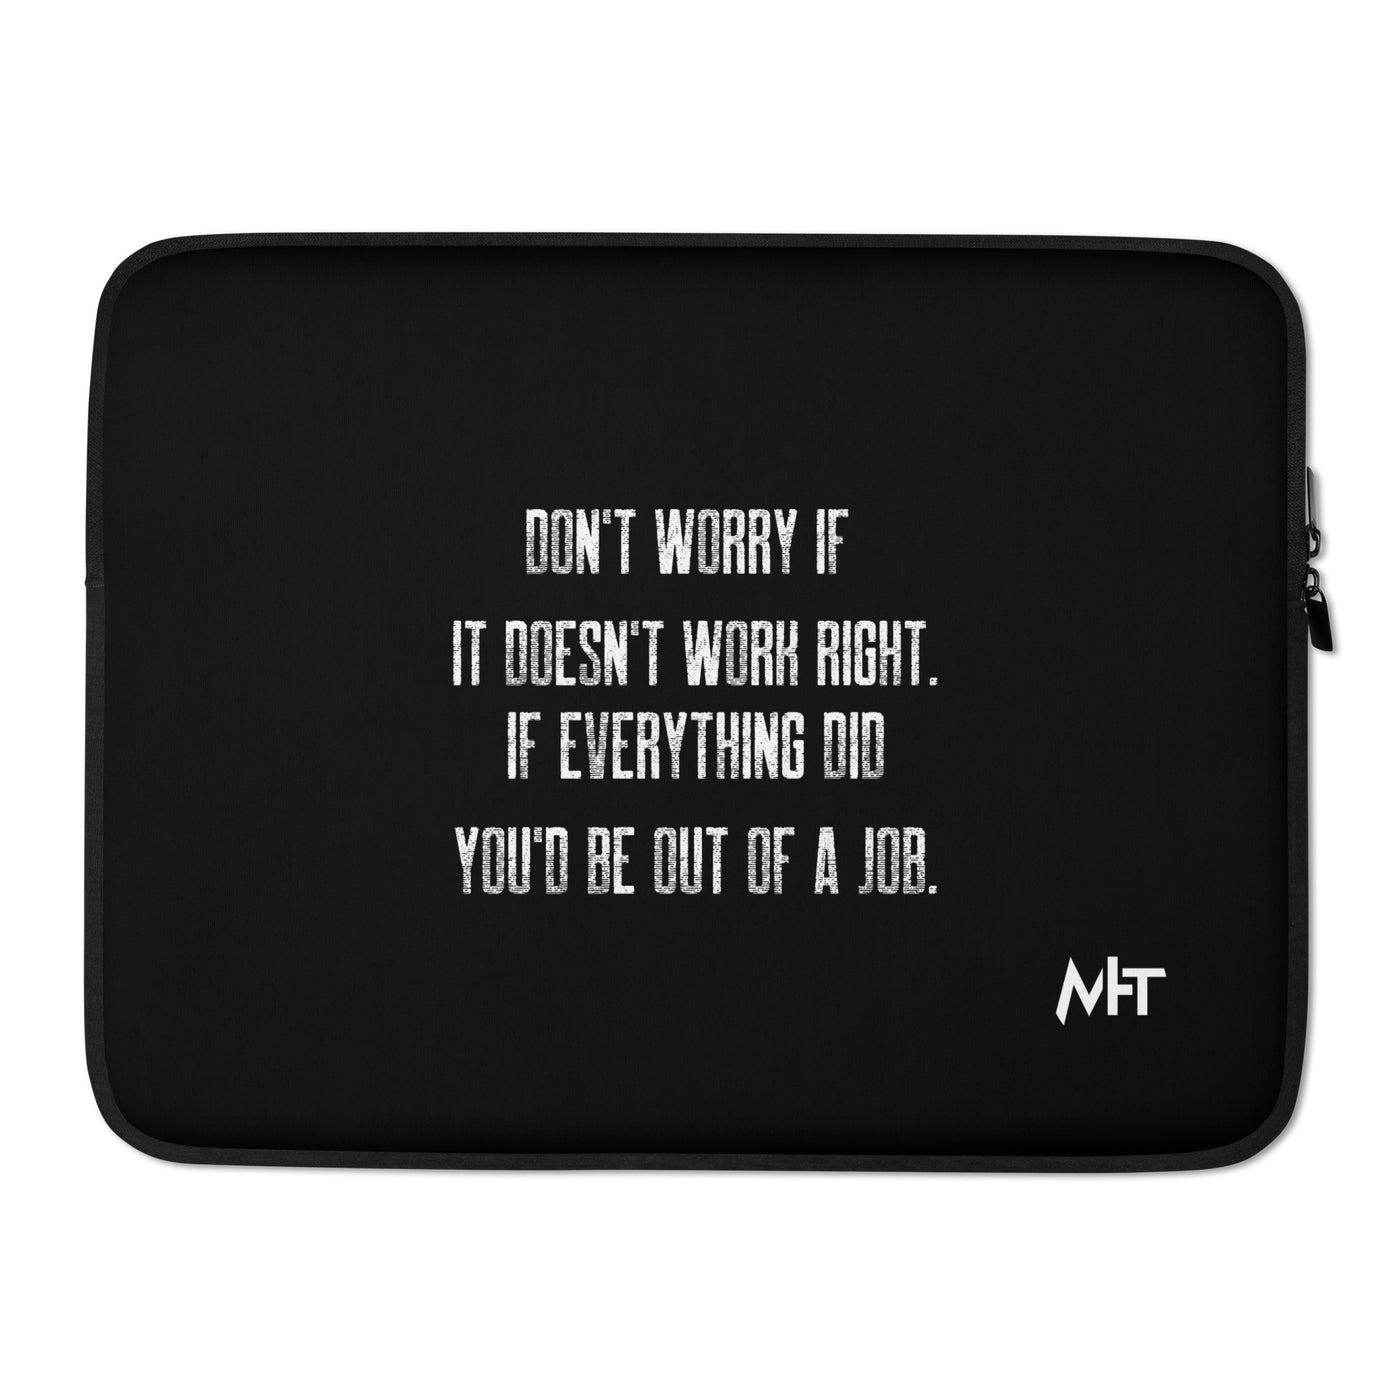 Don't worry if it doesn't work right: if everything did, you would be out of your job V2 - Laptop Sleeve